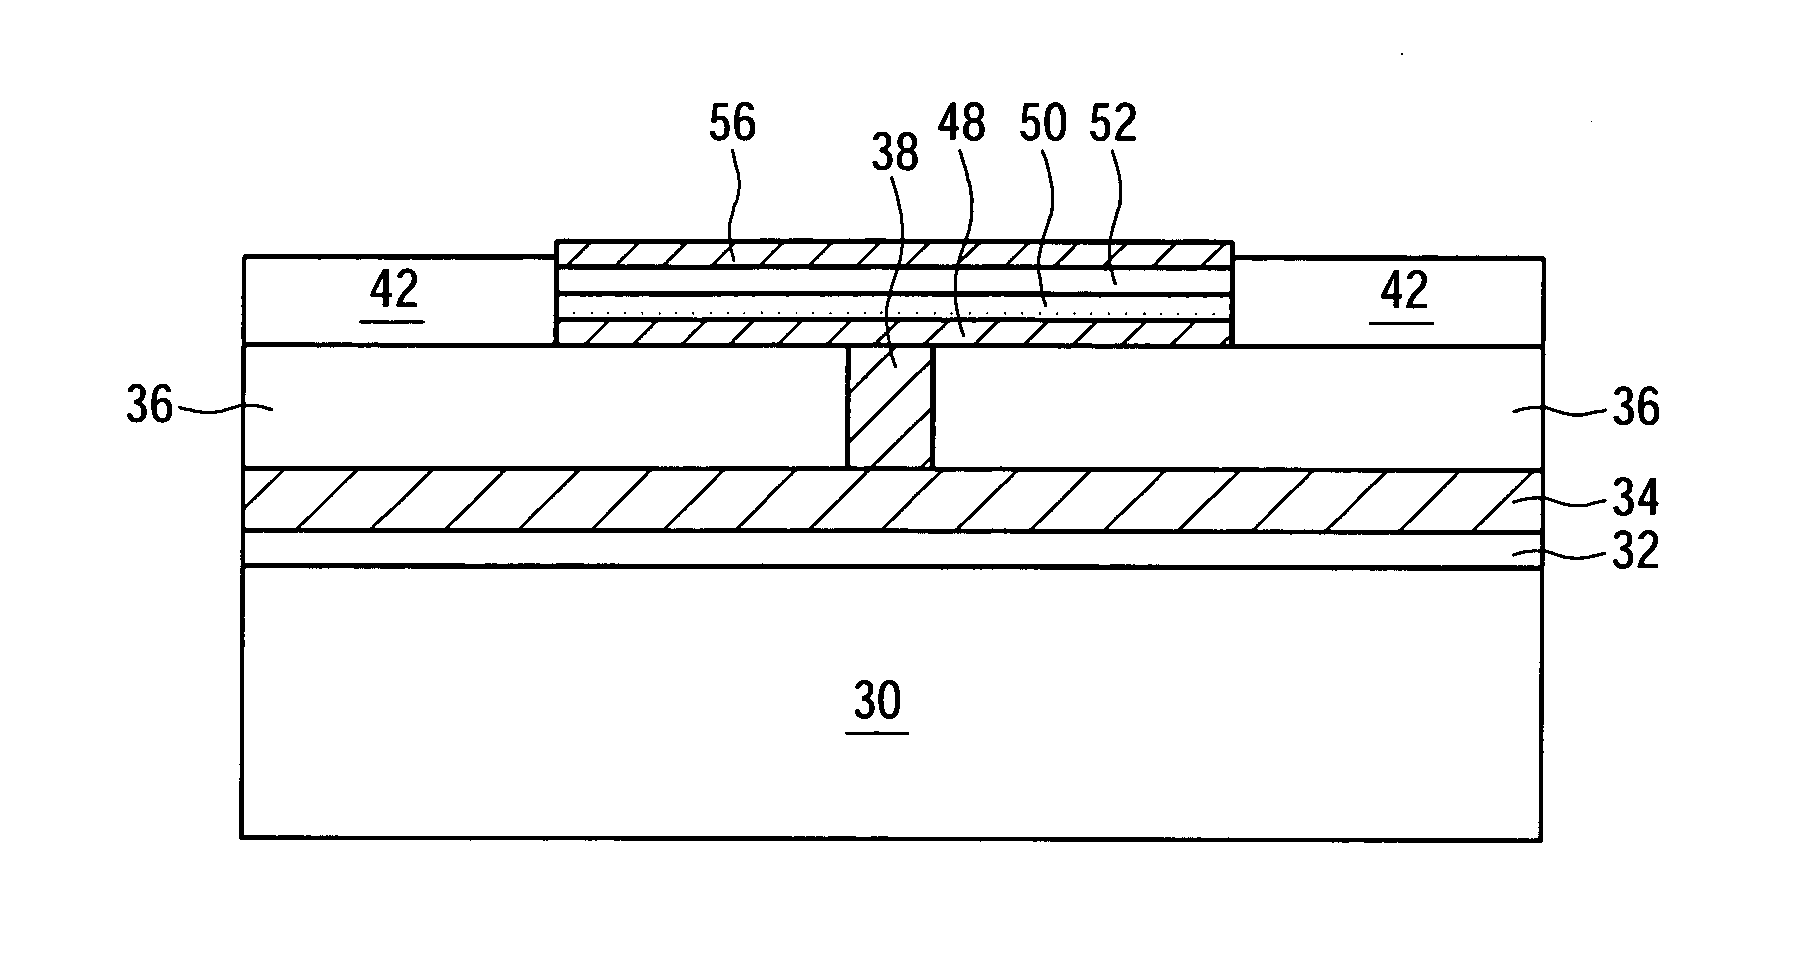 Phase change memory devices with reduced programming current